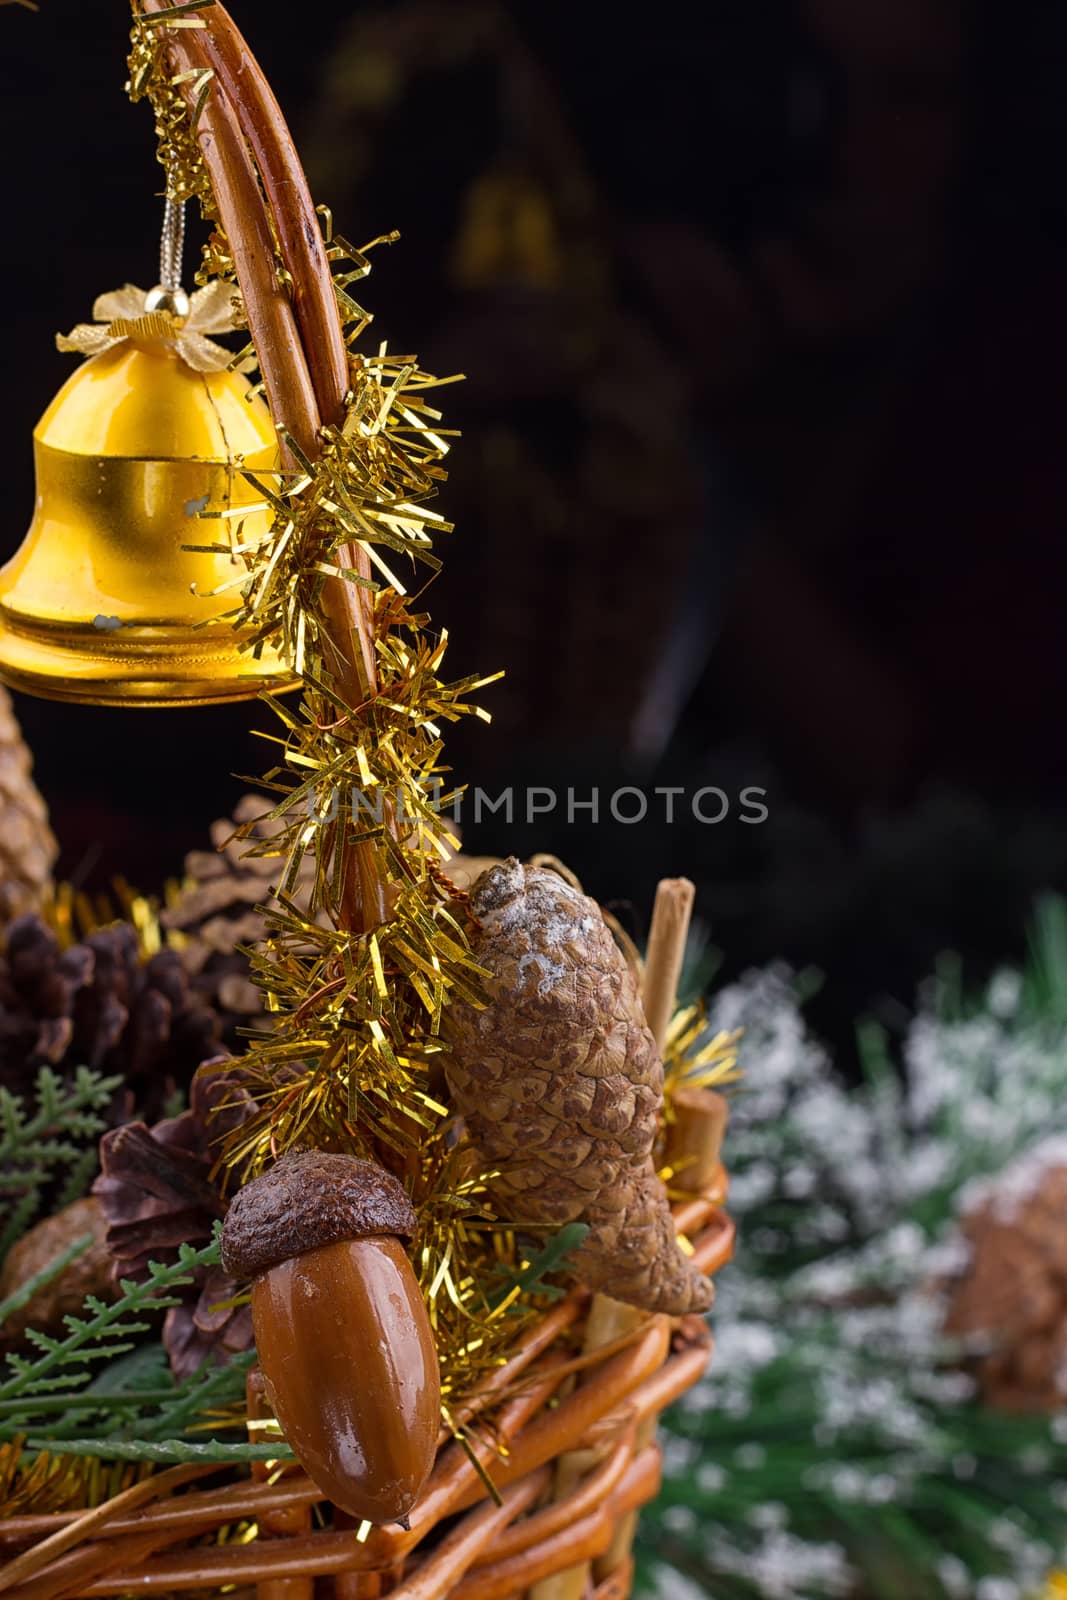 Christmas ornaments with garland of beads, pine cones and acorns laying in a basket with greens